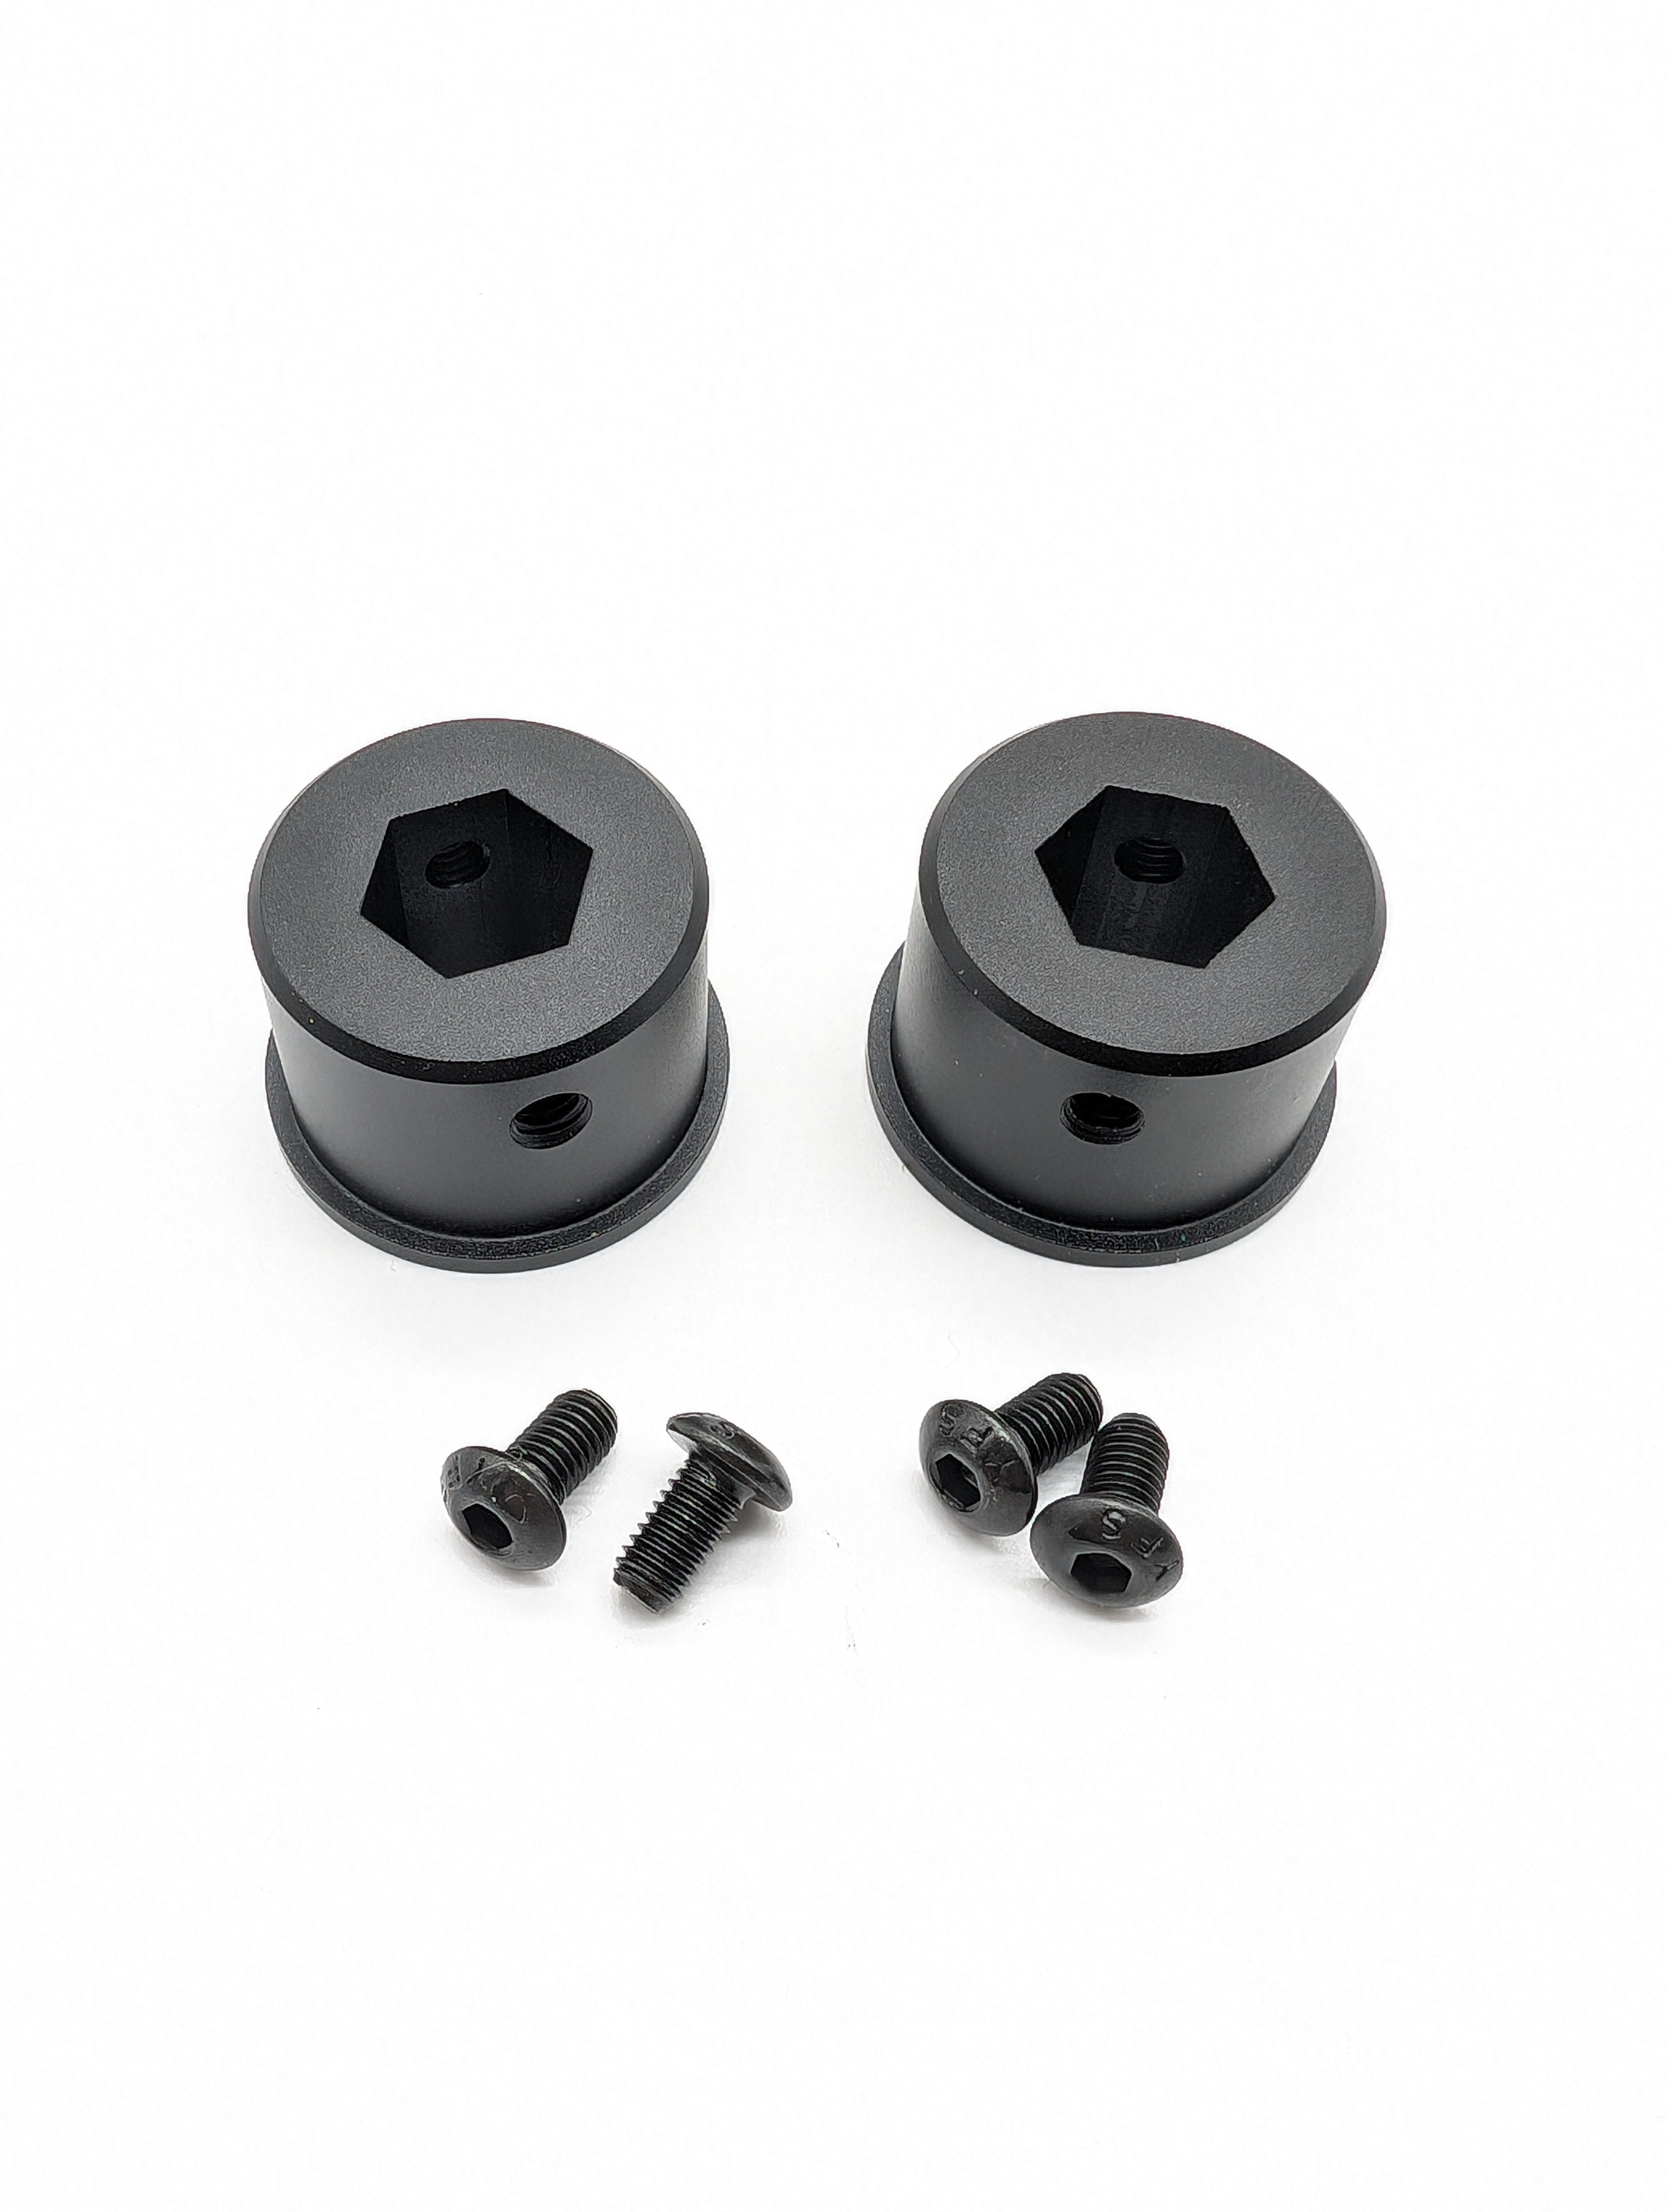 Thrifty Live Axle Tube Roller Kit